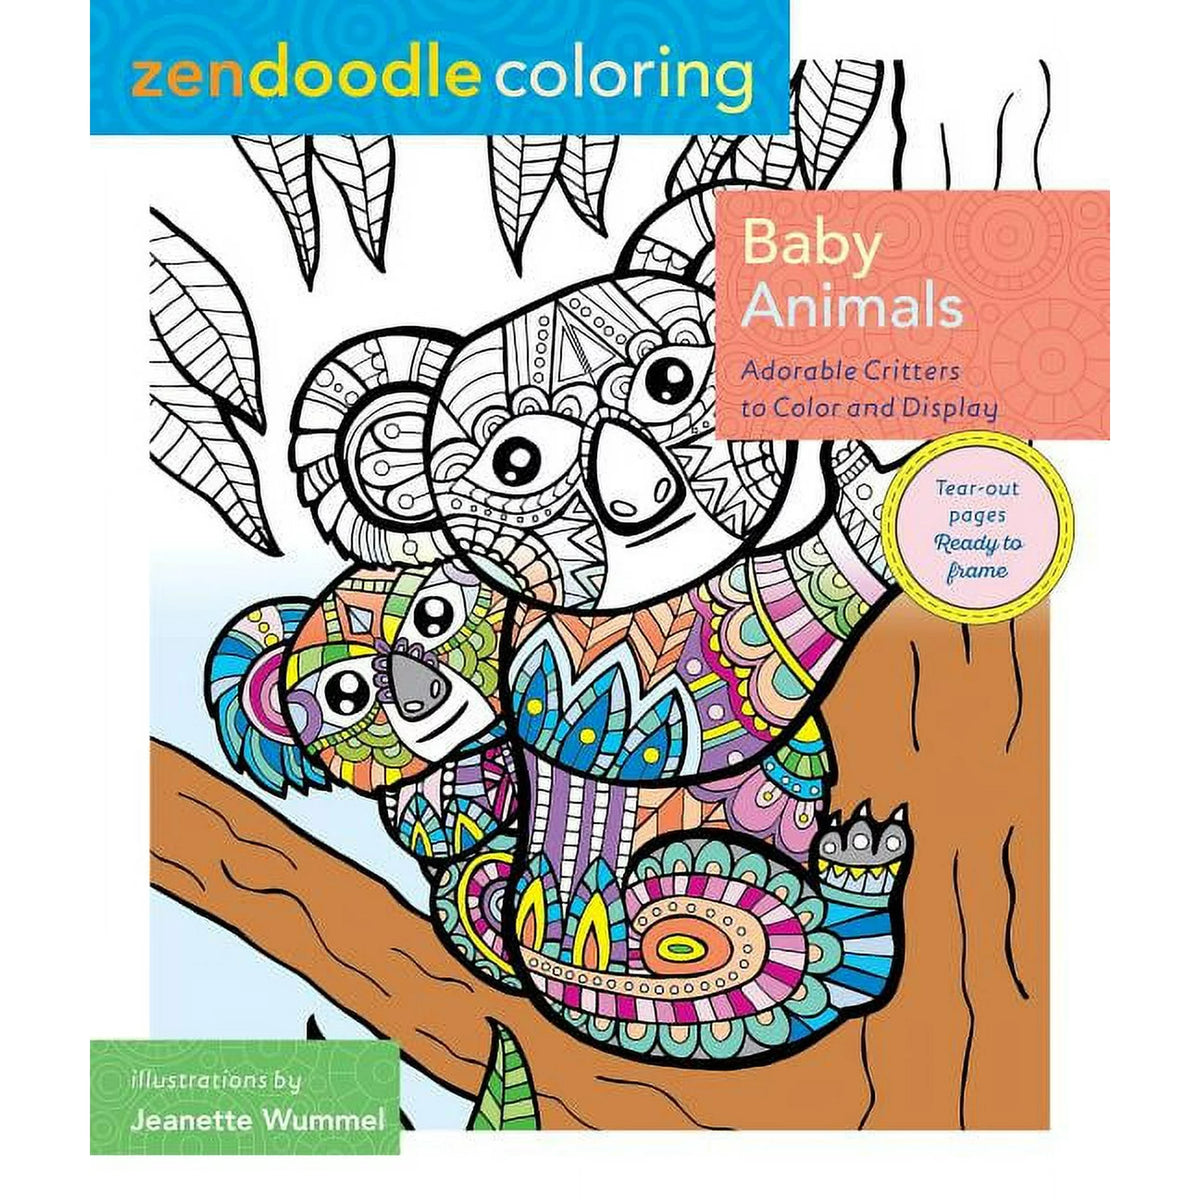 Zendoodle Coloring: Zendoodle Coloring: Baby Animals : Adorable Critters to Color and Display